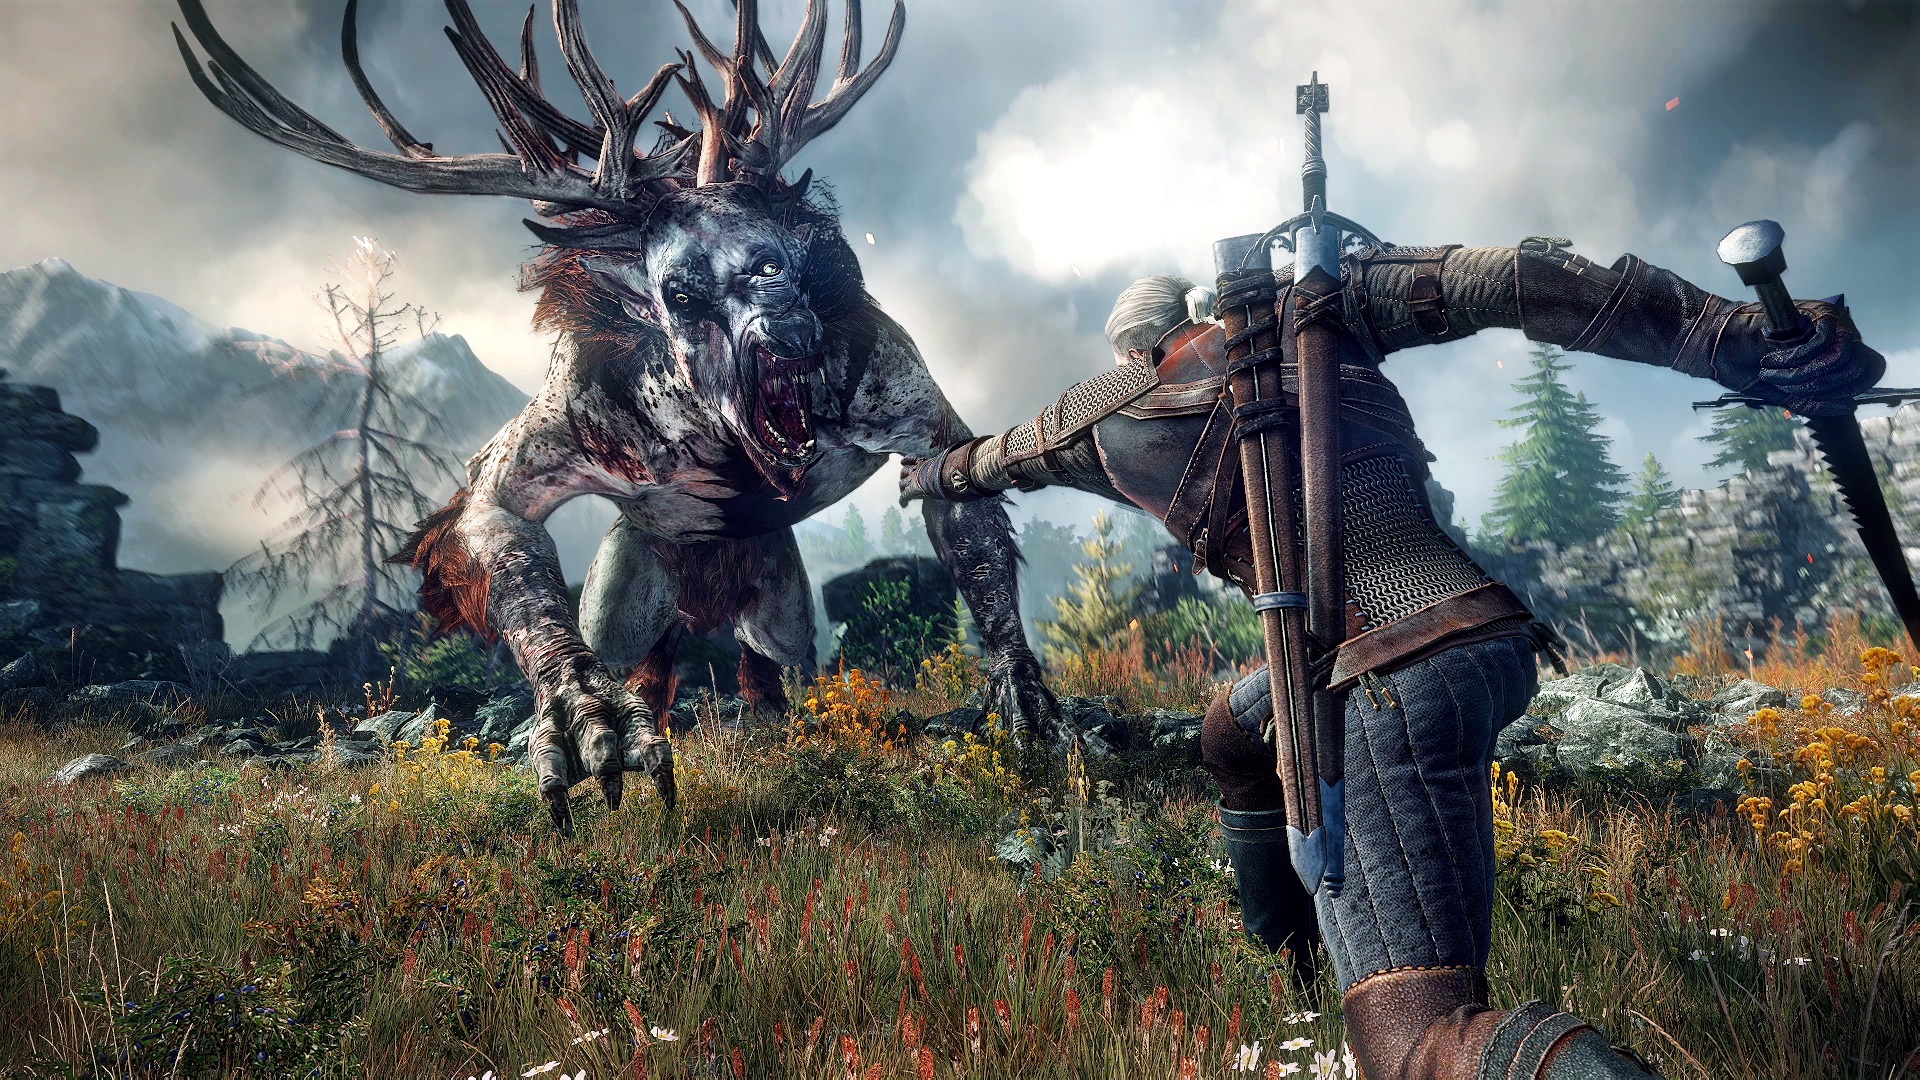 The new version of Witcher 3 will be improved thanks to the fan work

